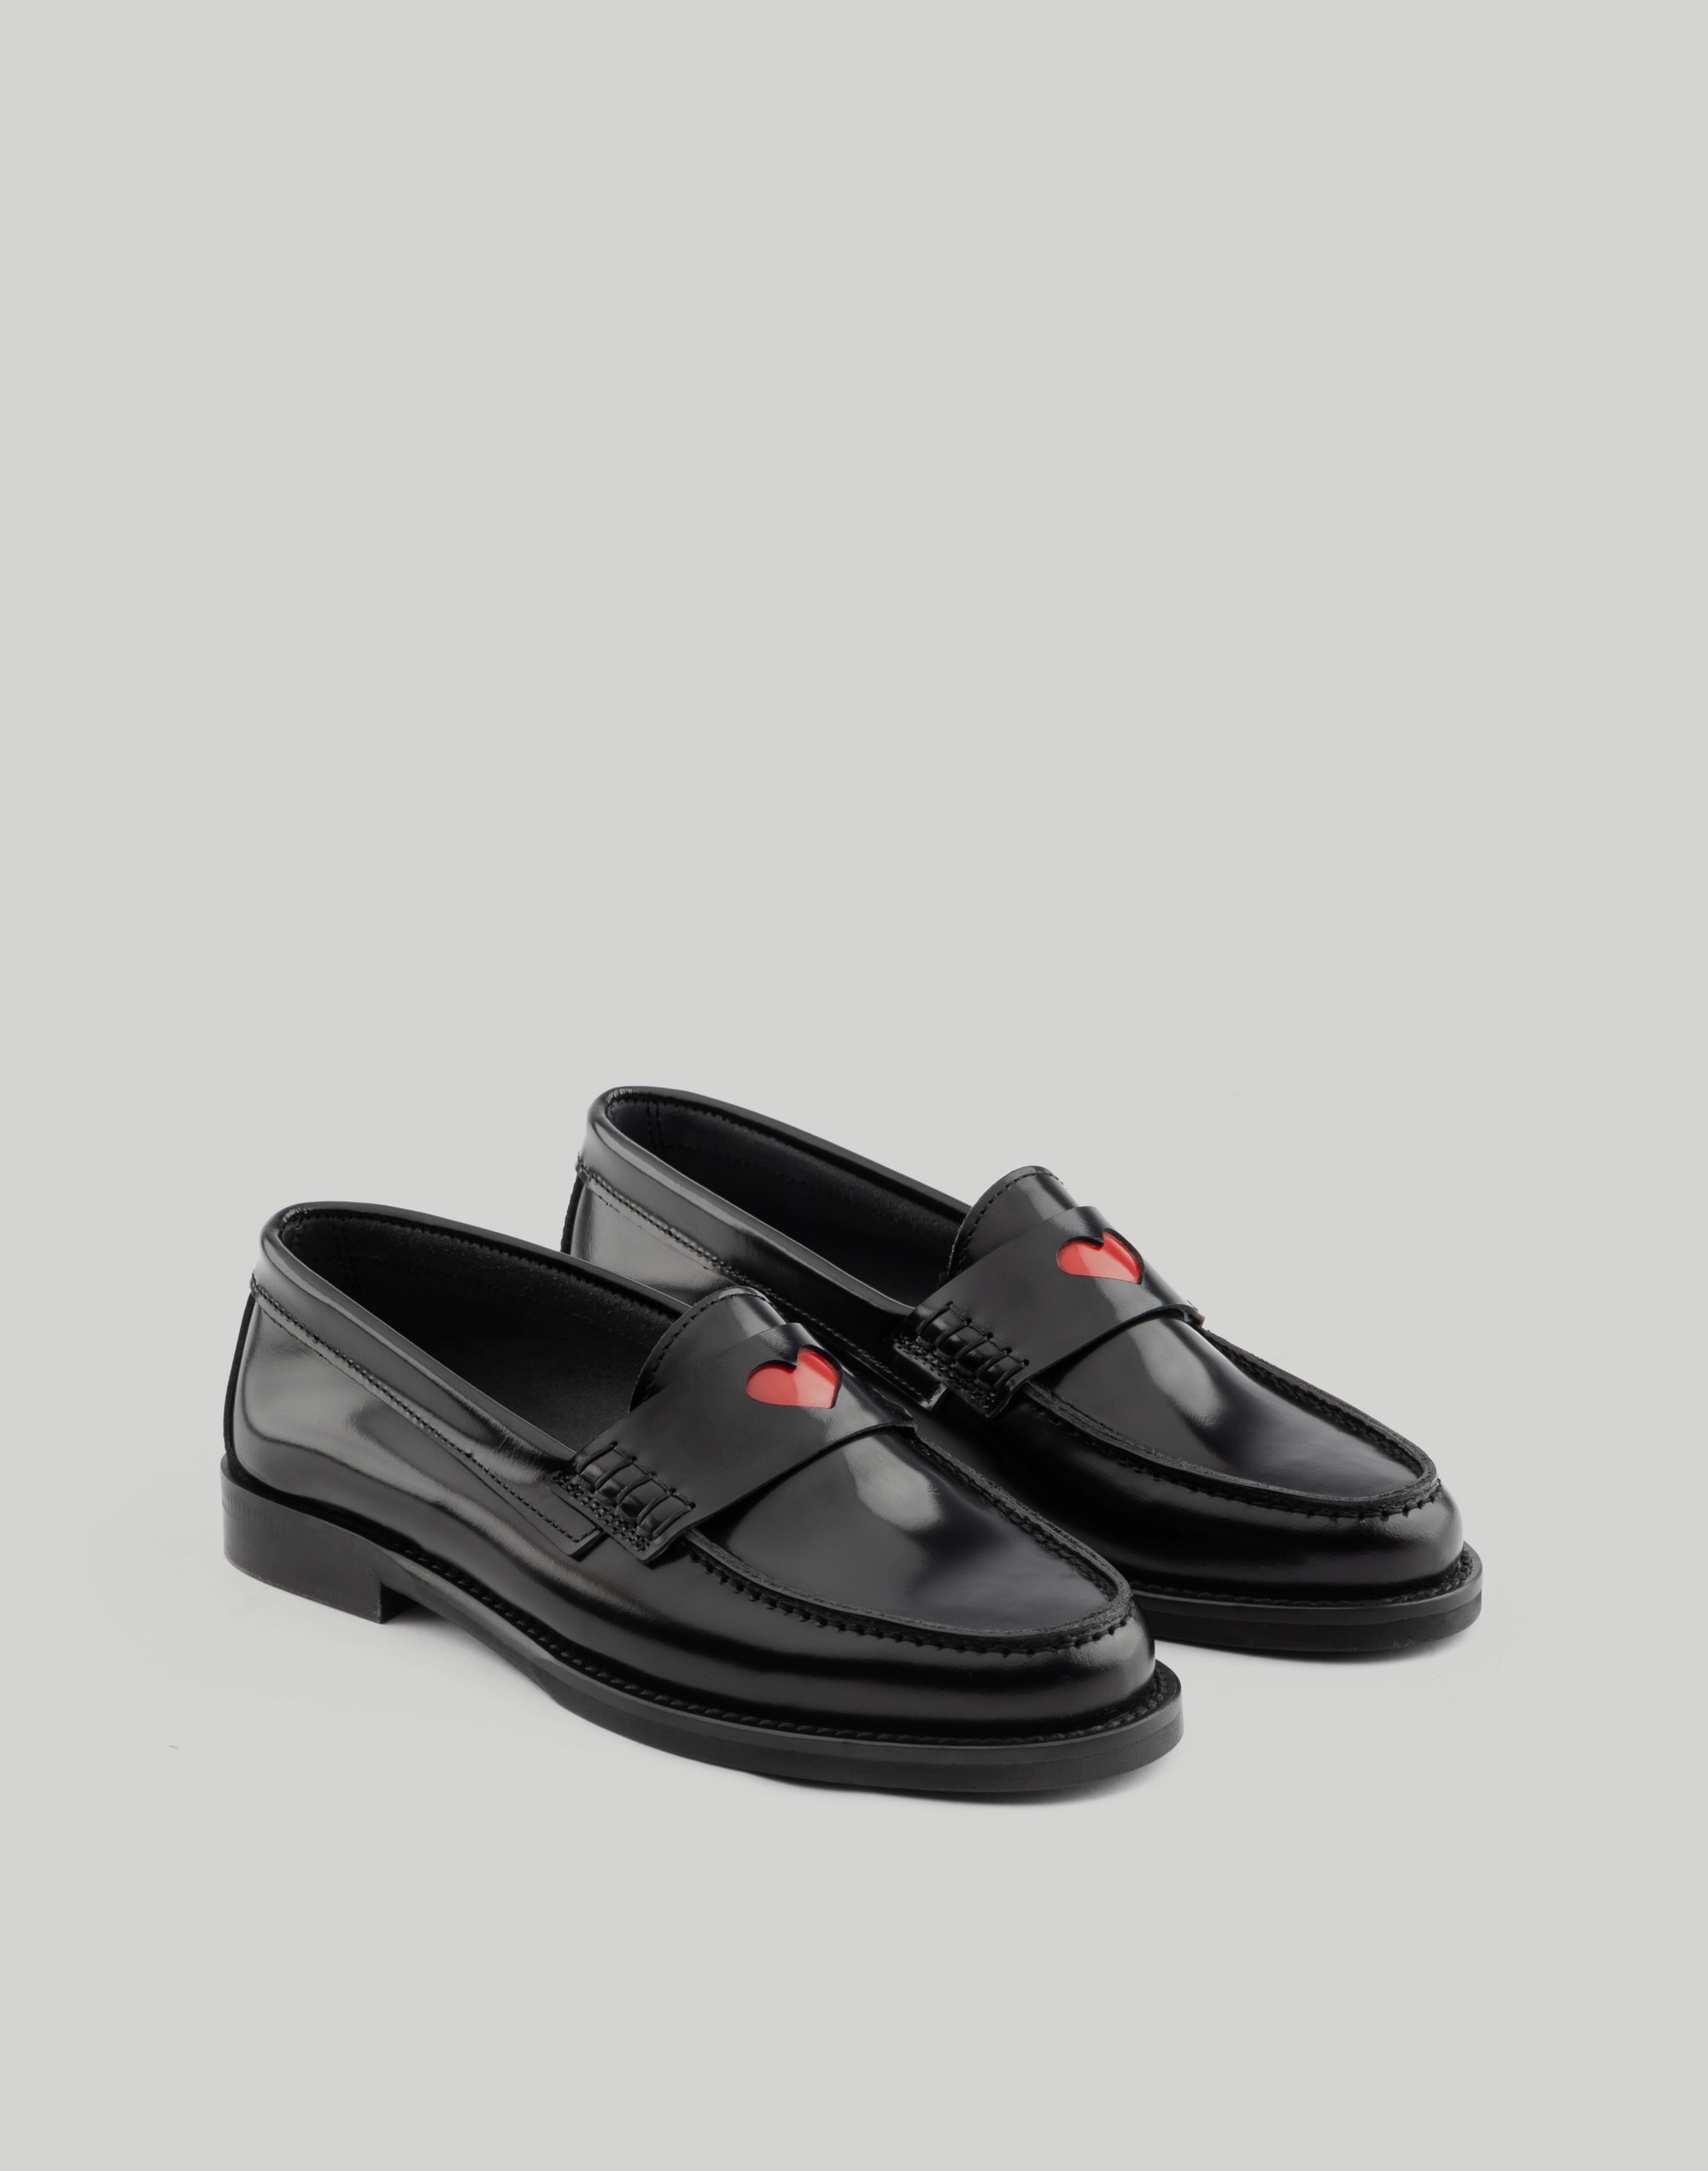 Maguire Napoli Loafers Black Heart